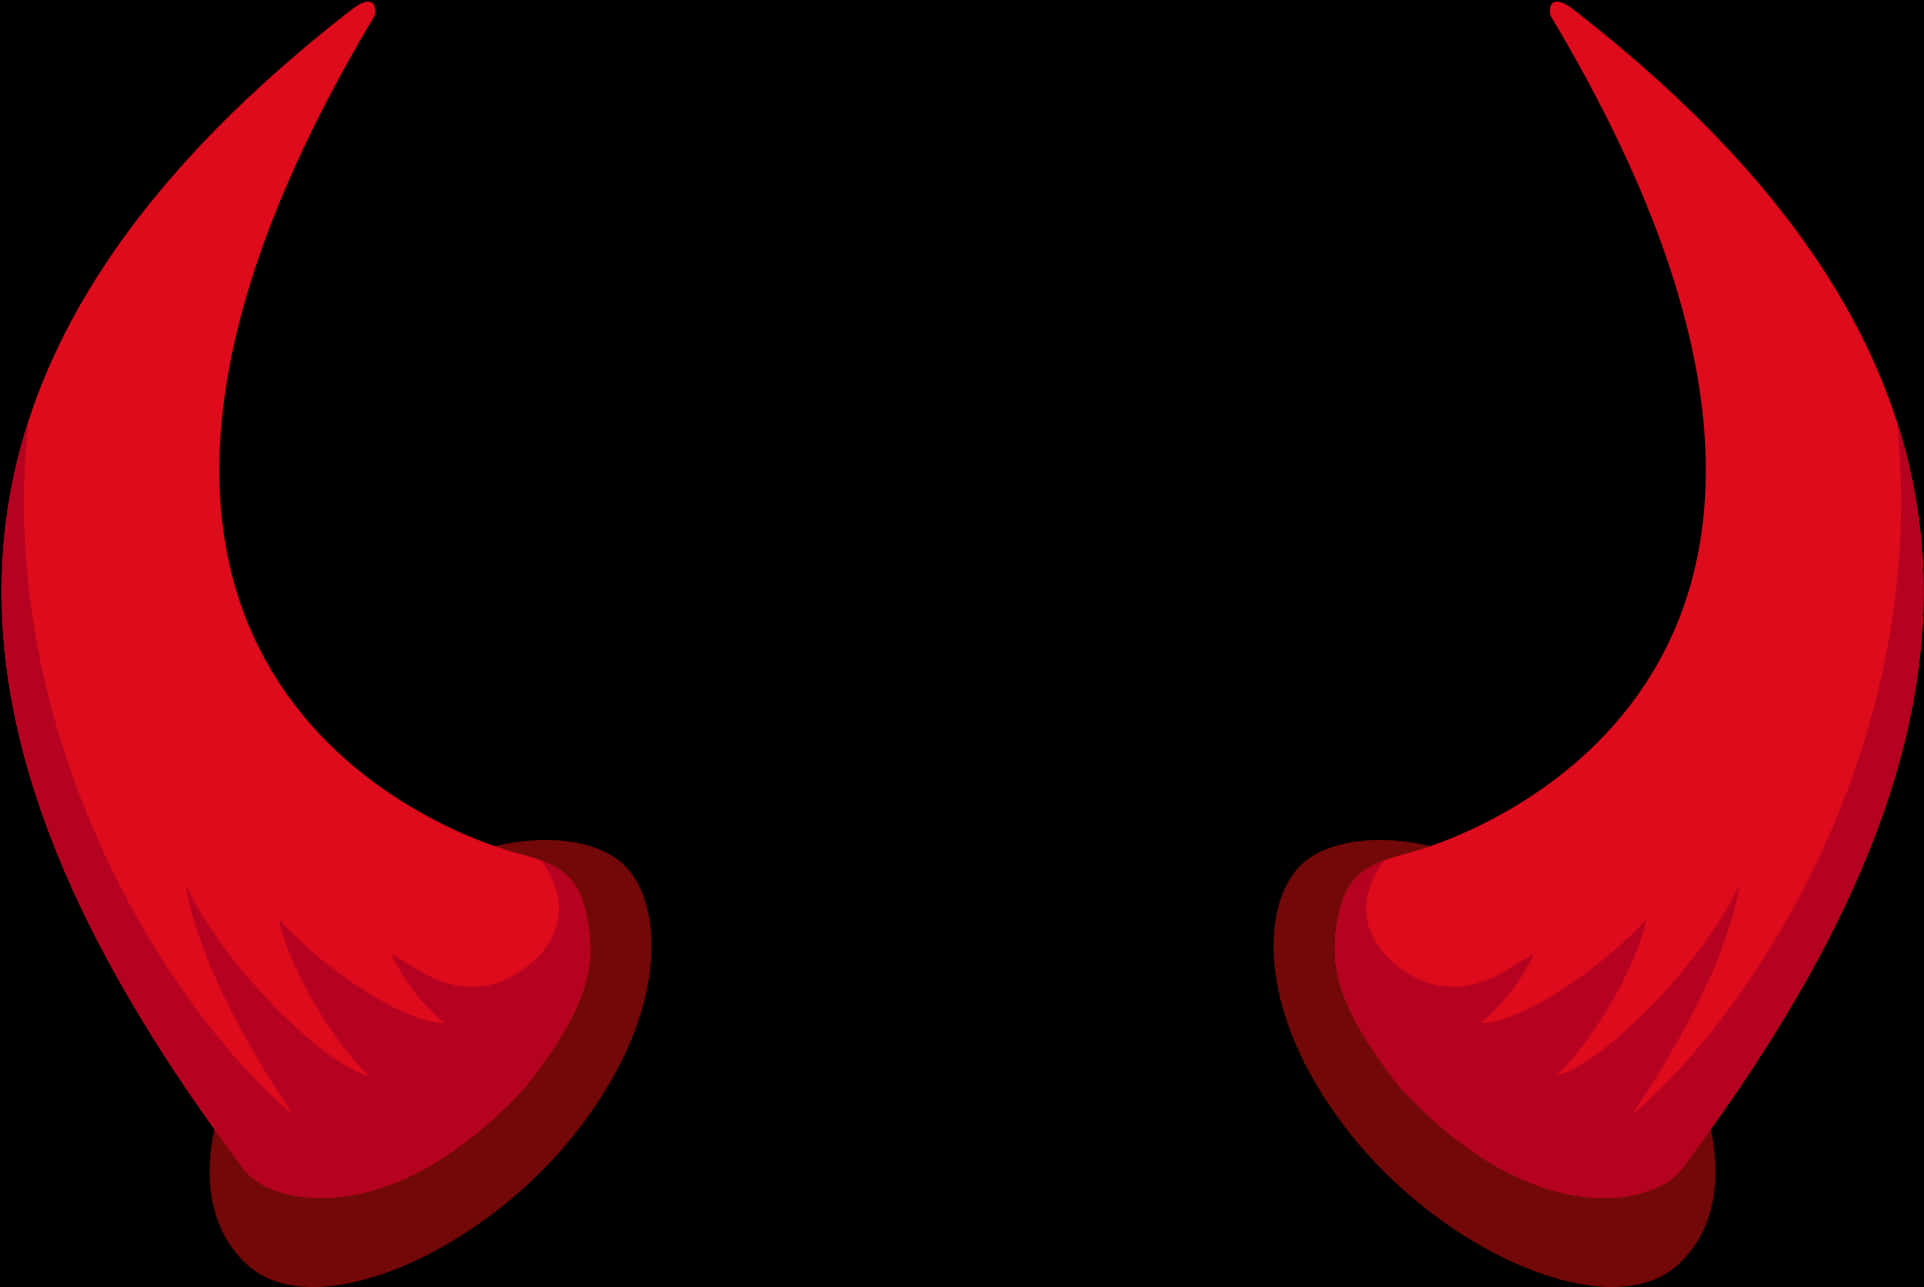 Red Devil Horns Graphic PNG image